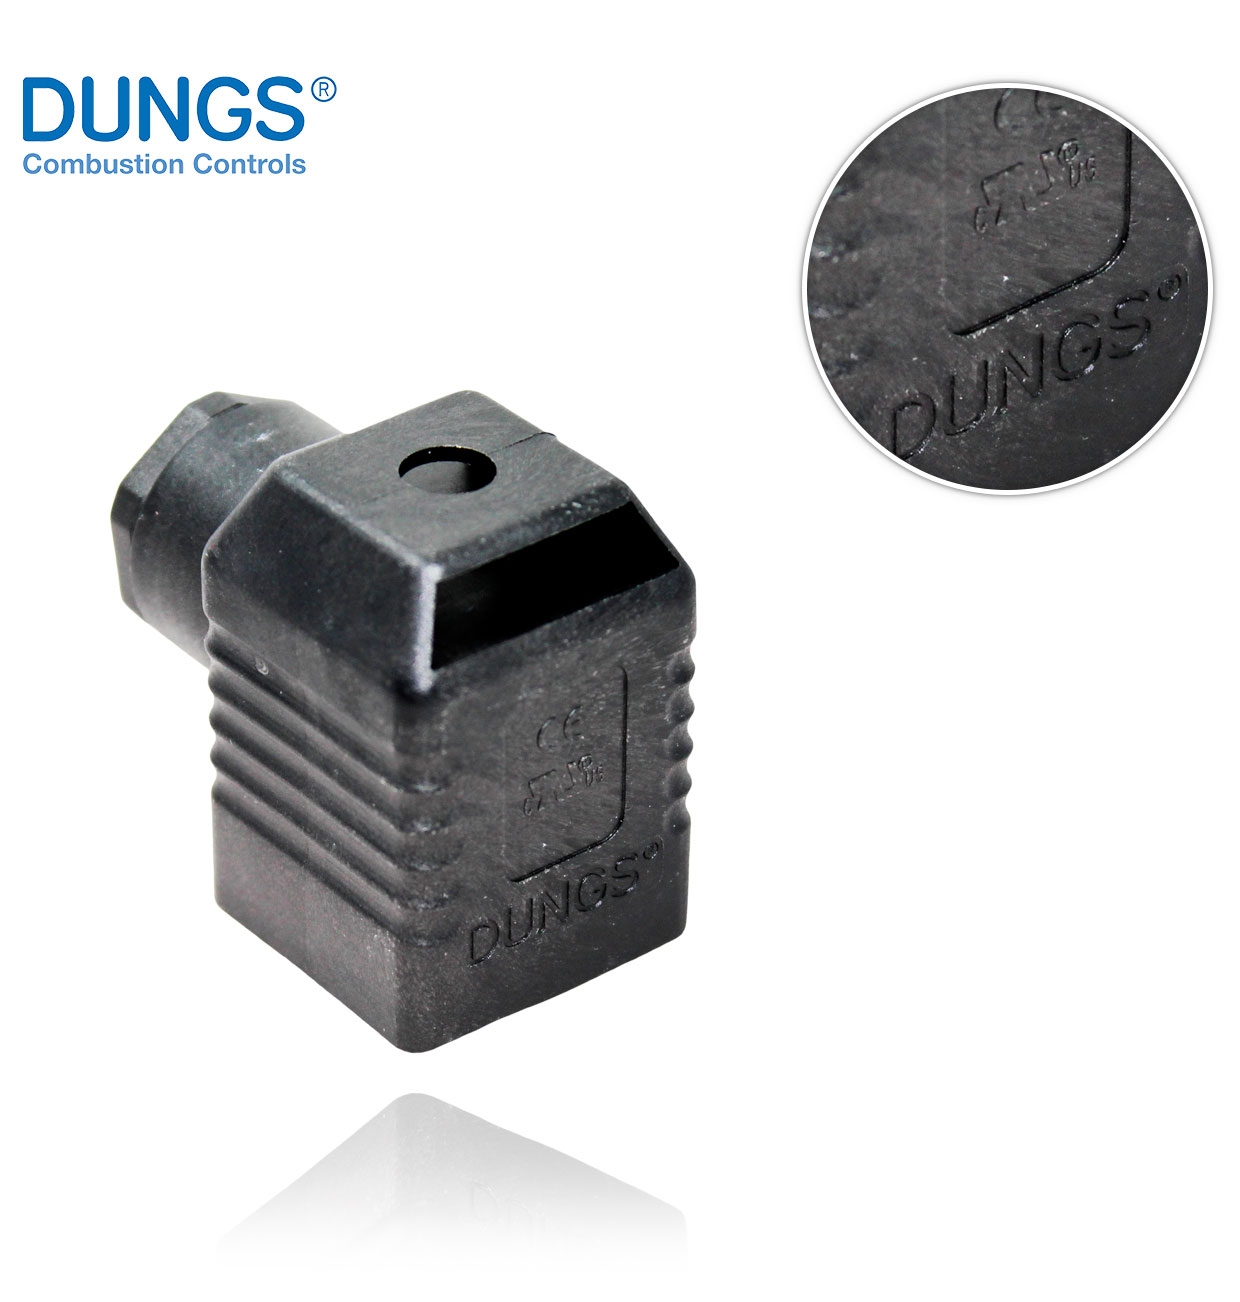 BLACK 3 pole CONNECTOR + EARTH FOR DUNGS MB-, MBC, DMV- ETC.